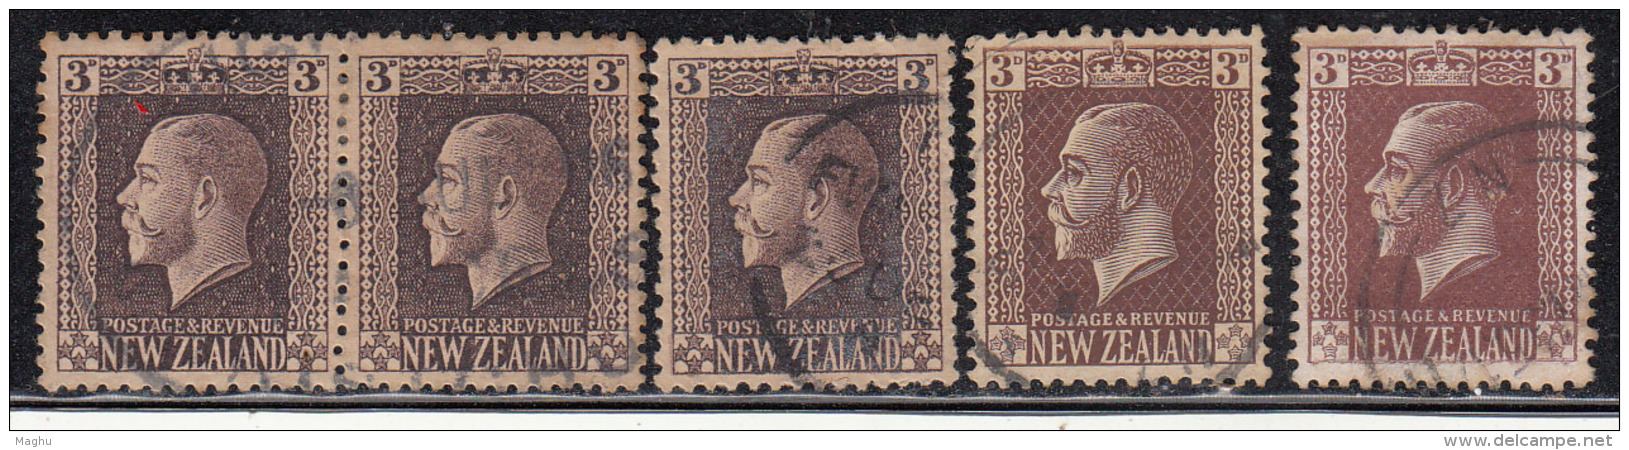 3d X 5 Used, Shades &amp; Perferation Varities, KGV Series, 1915 Onwards, New Zealand - Used Stamps